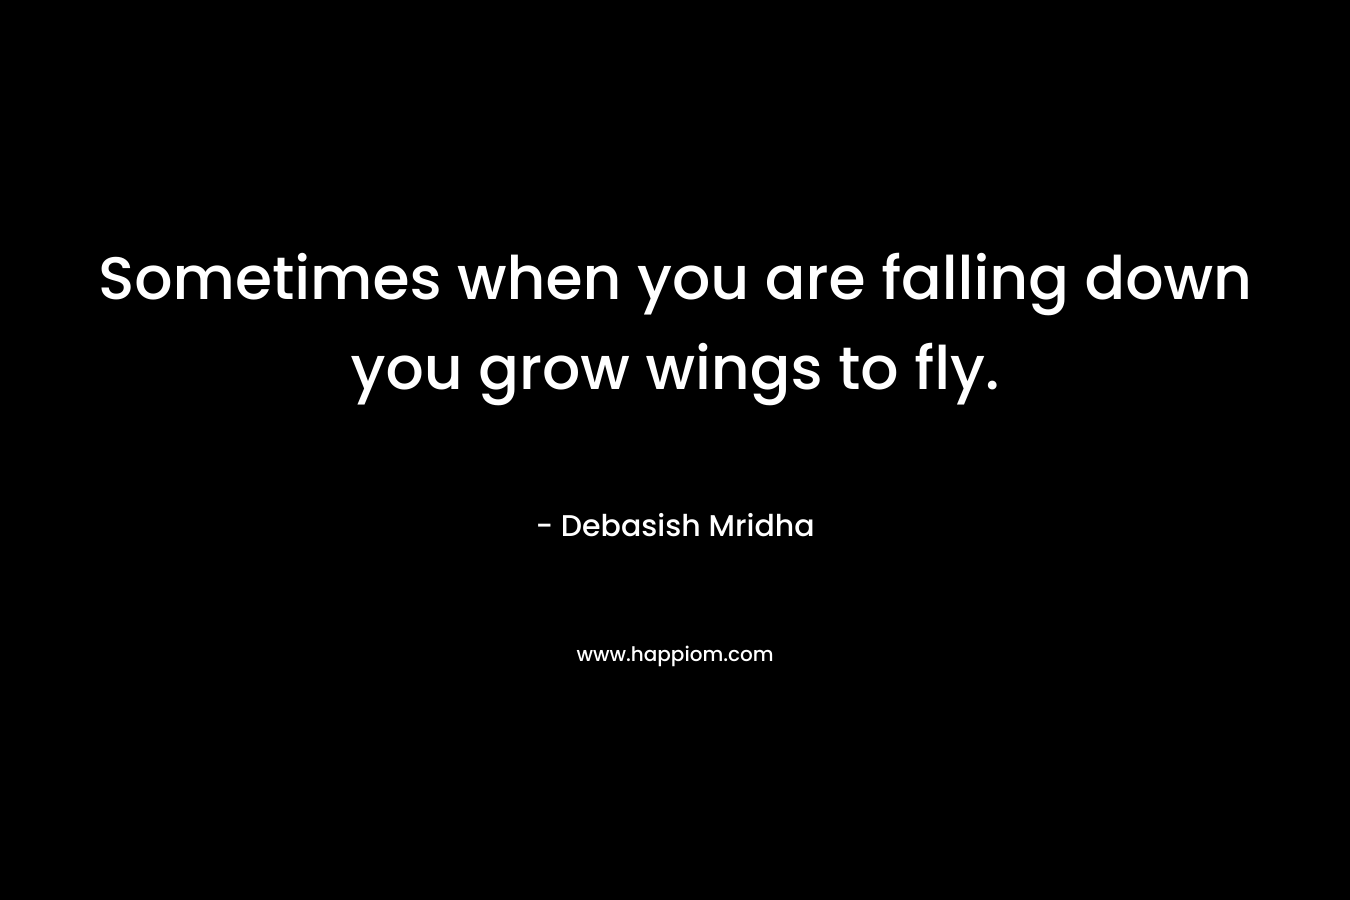 Sometimes when you are falling down you grow wings to fly.